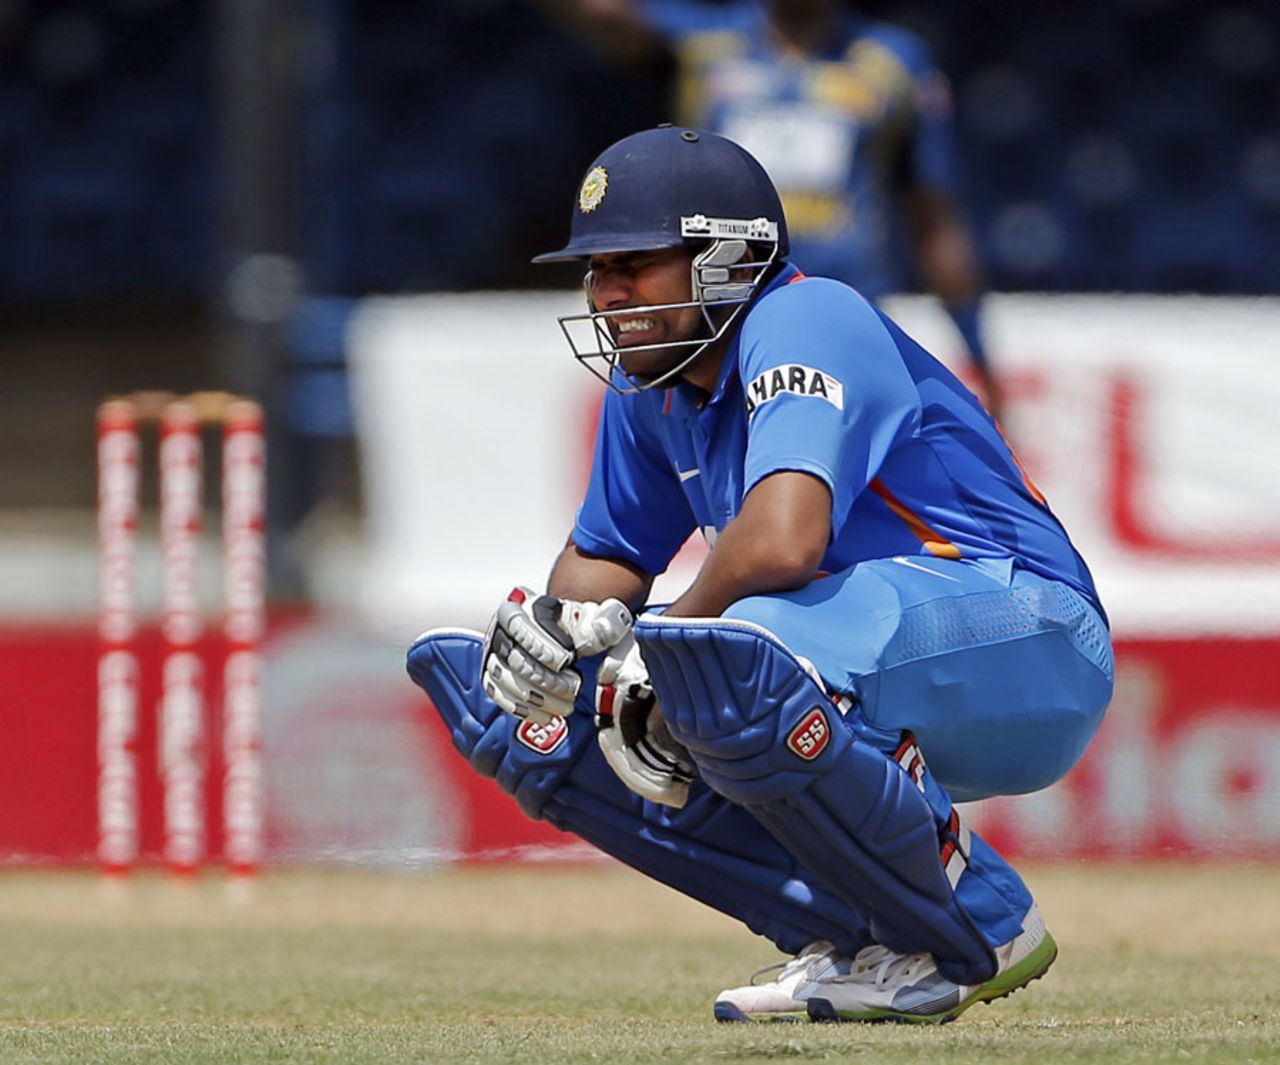 Rohit Sharma grimaces after getting hit on the body, India v Sri Lanka, West Indies tri-series, Port-of-Spain, July 9, 2013